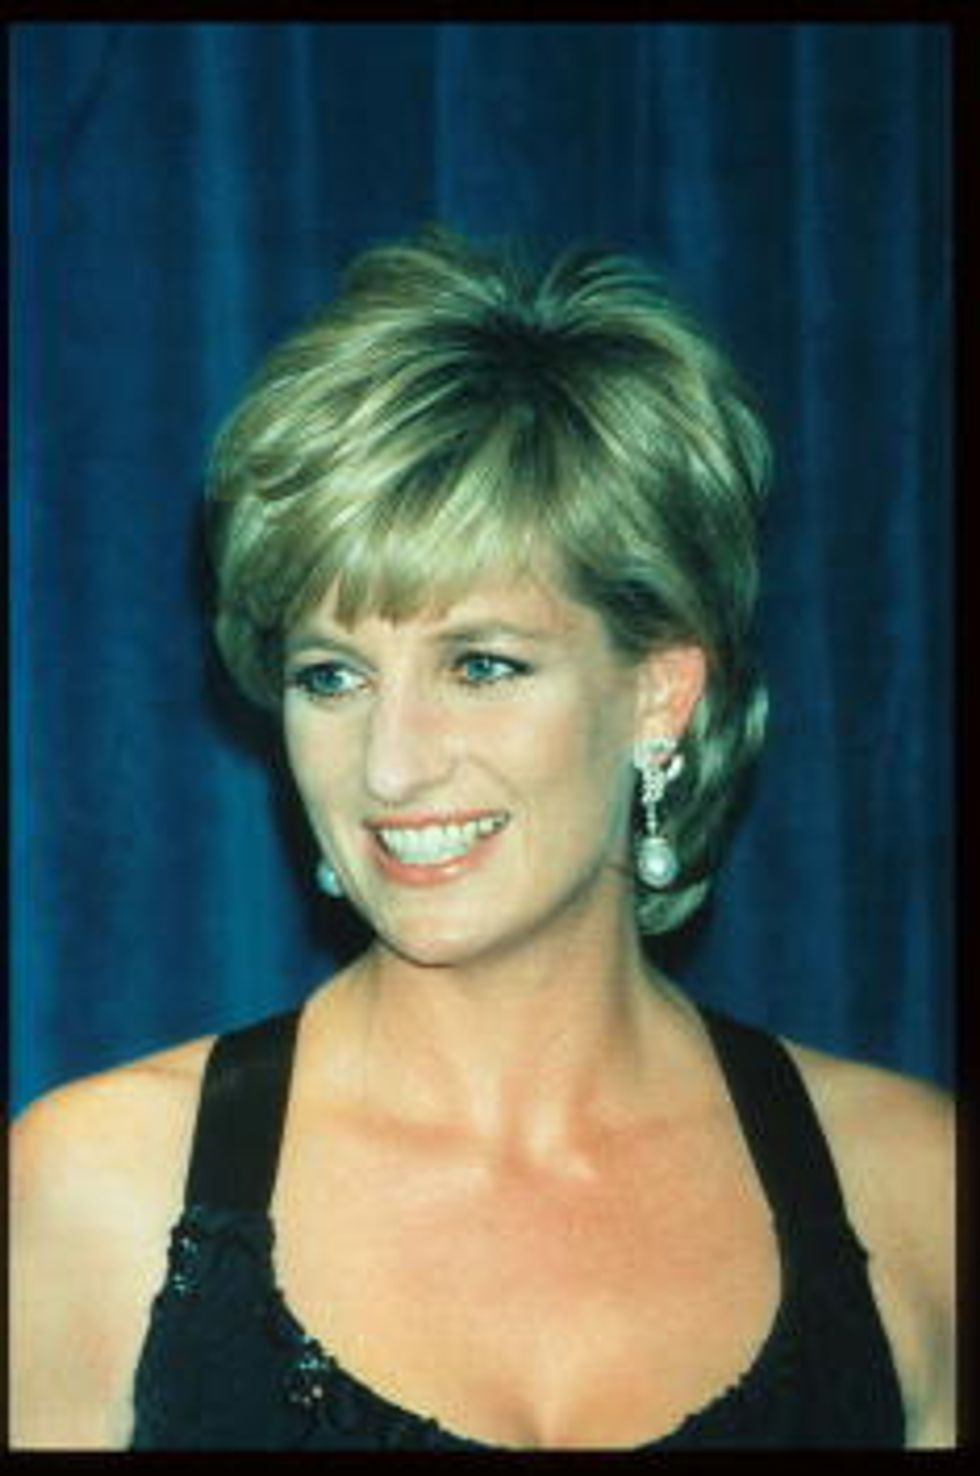 See What Princess Diana Would Have Looked Like Today at Age 56 | 22 Words